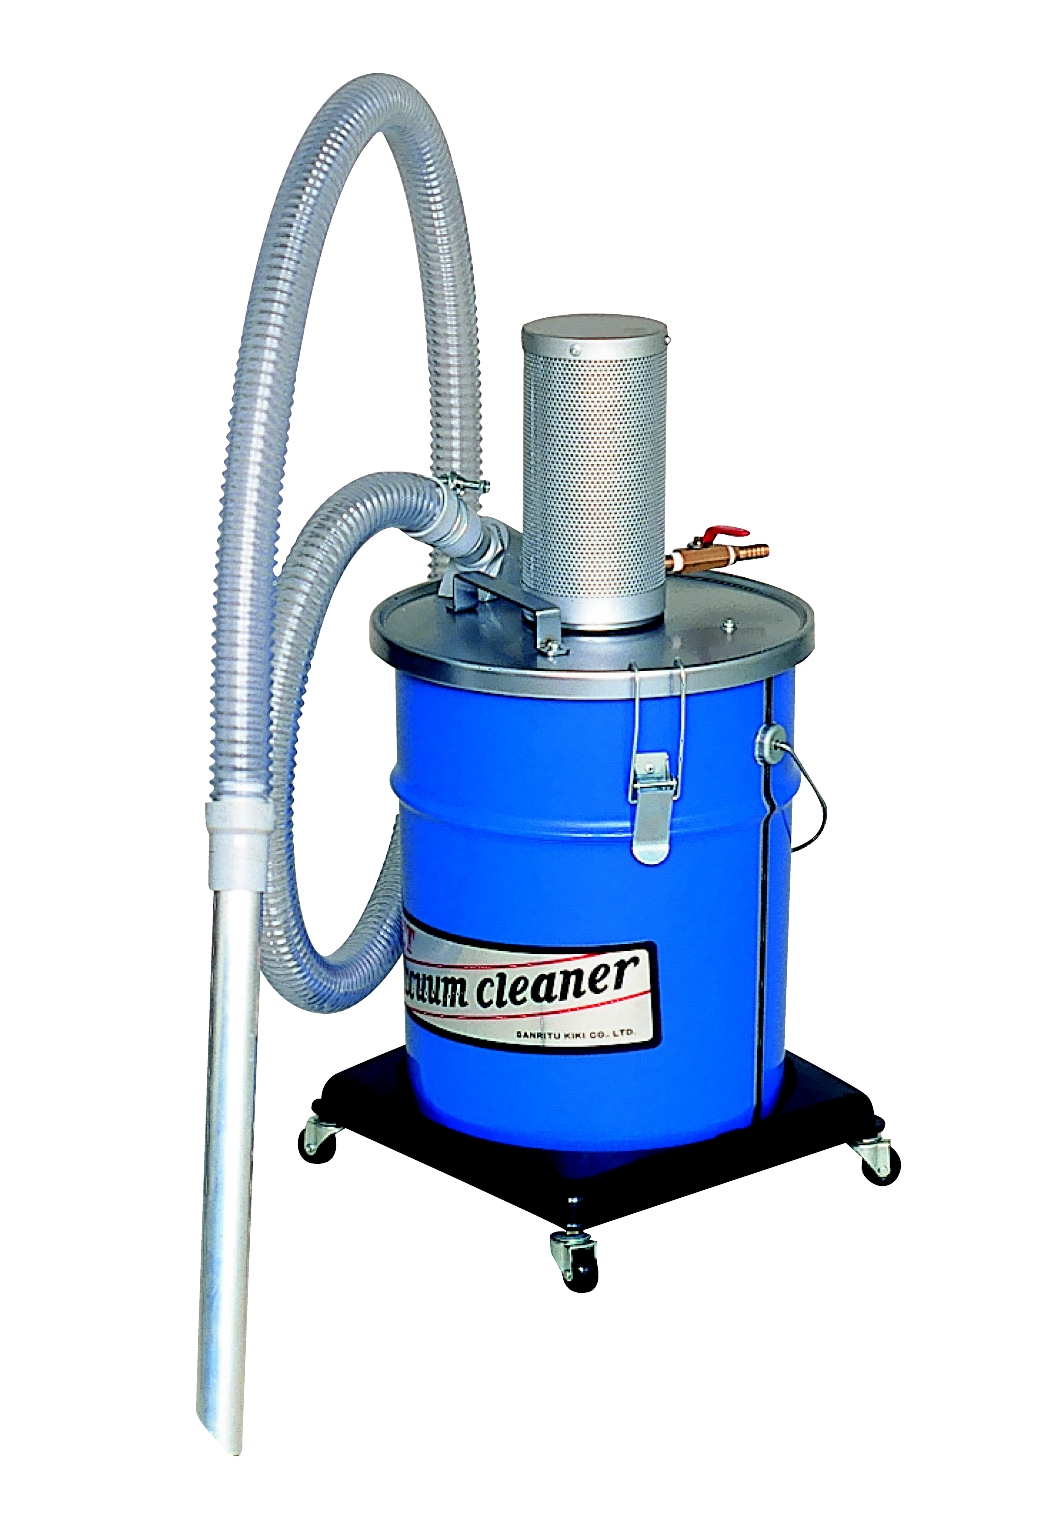 Air High Power Cleaner for Dry/Wet Dust Collection Capacity 9 L